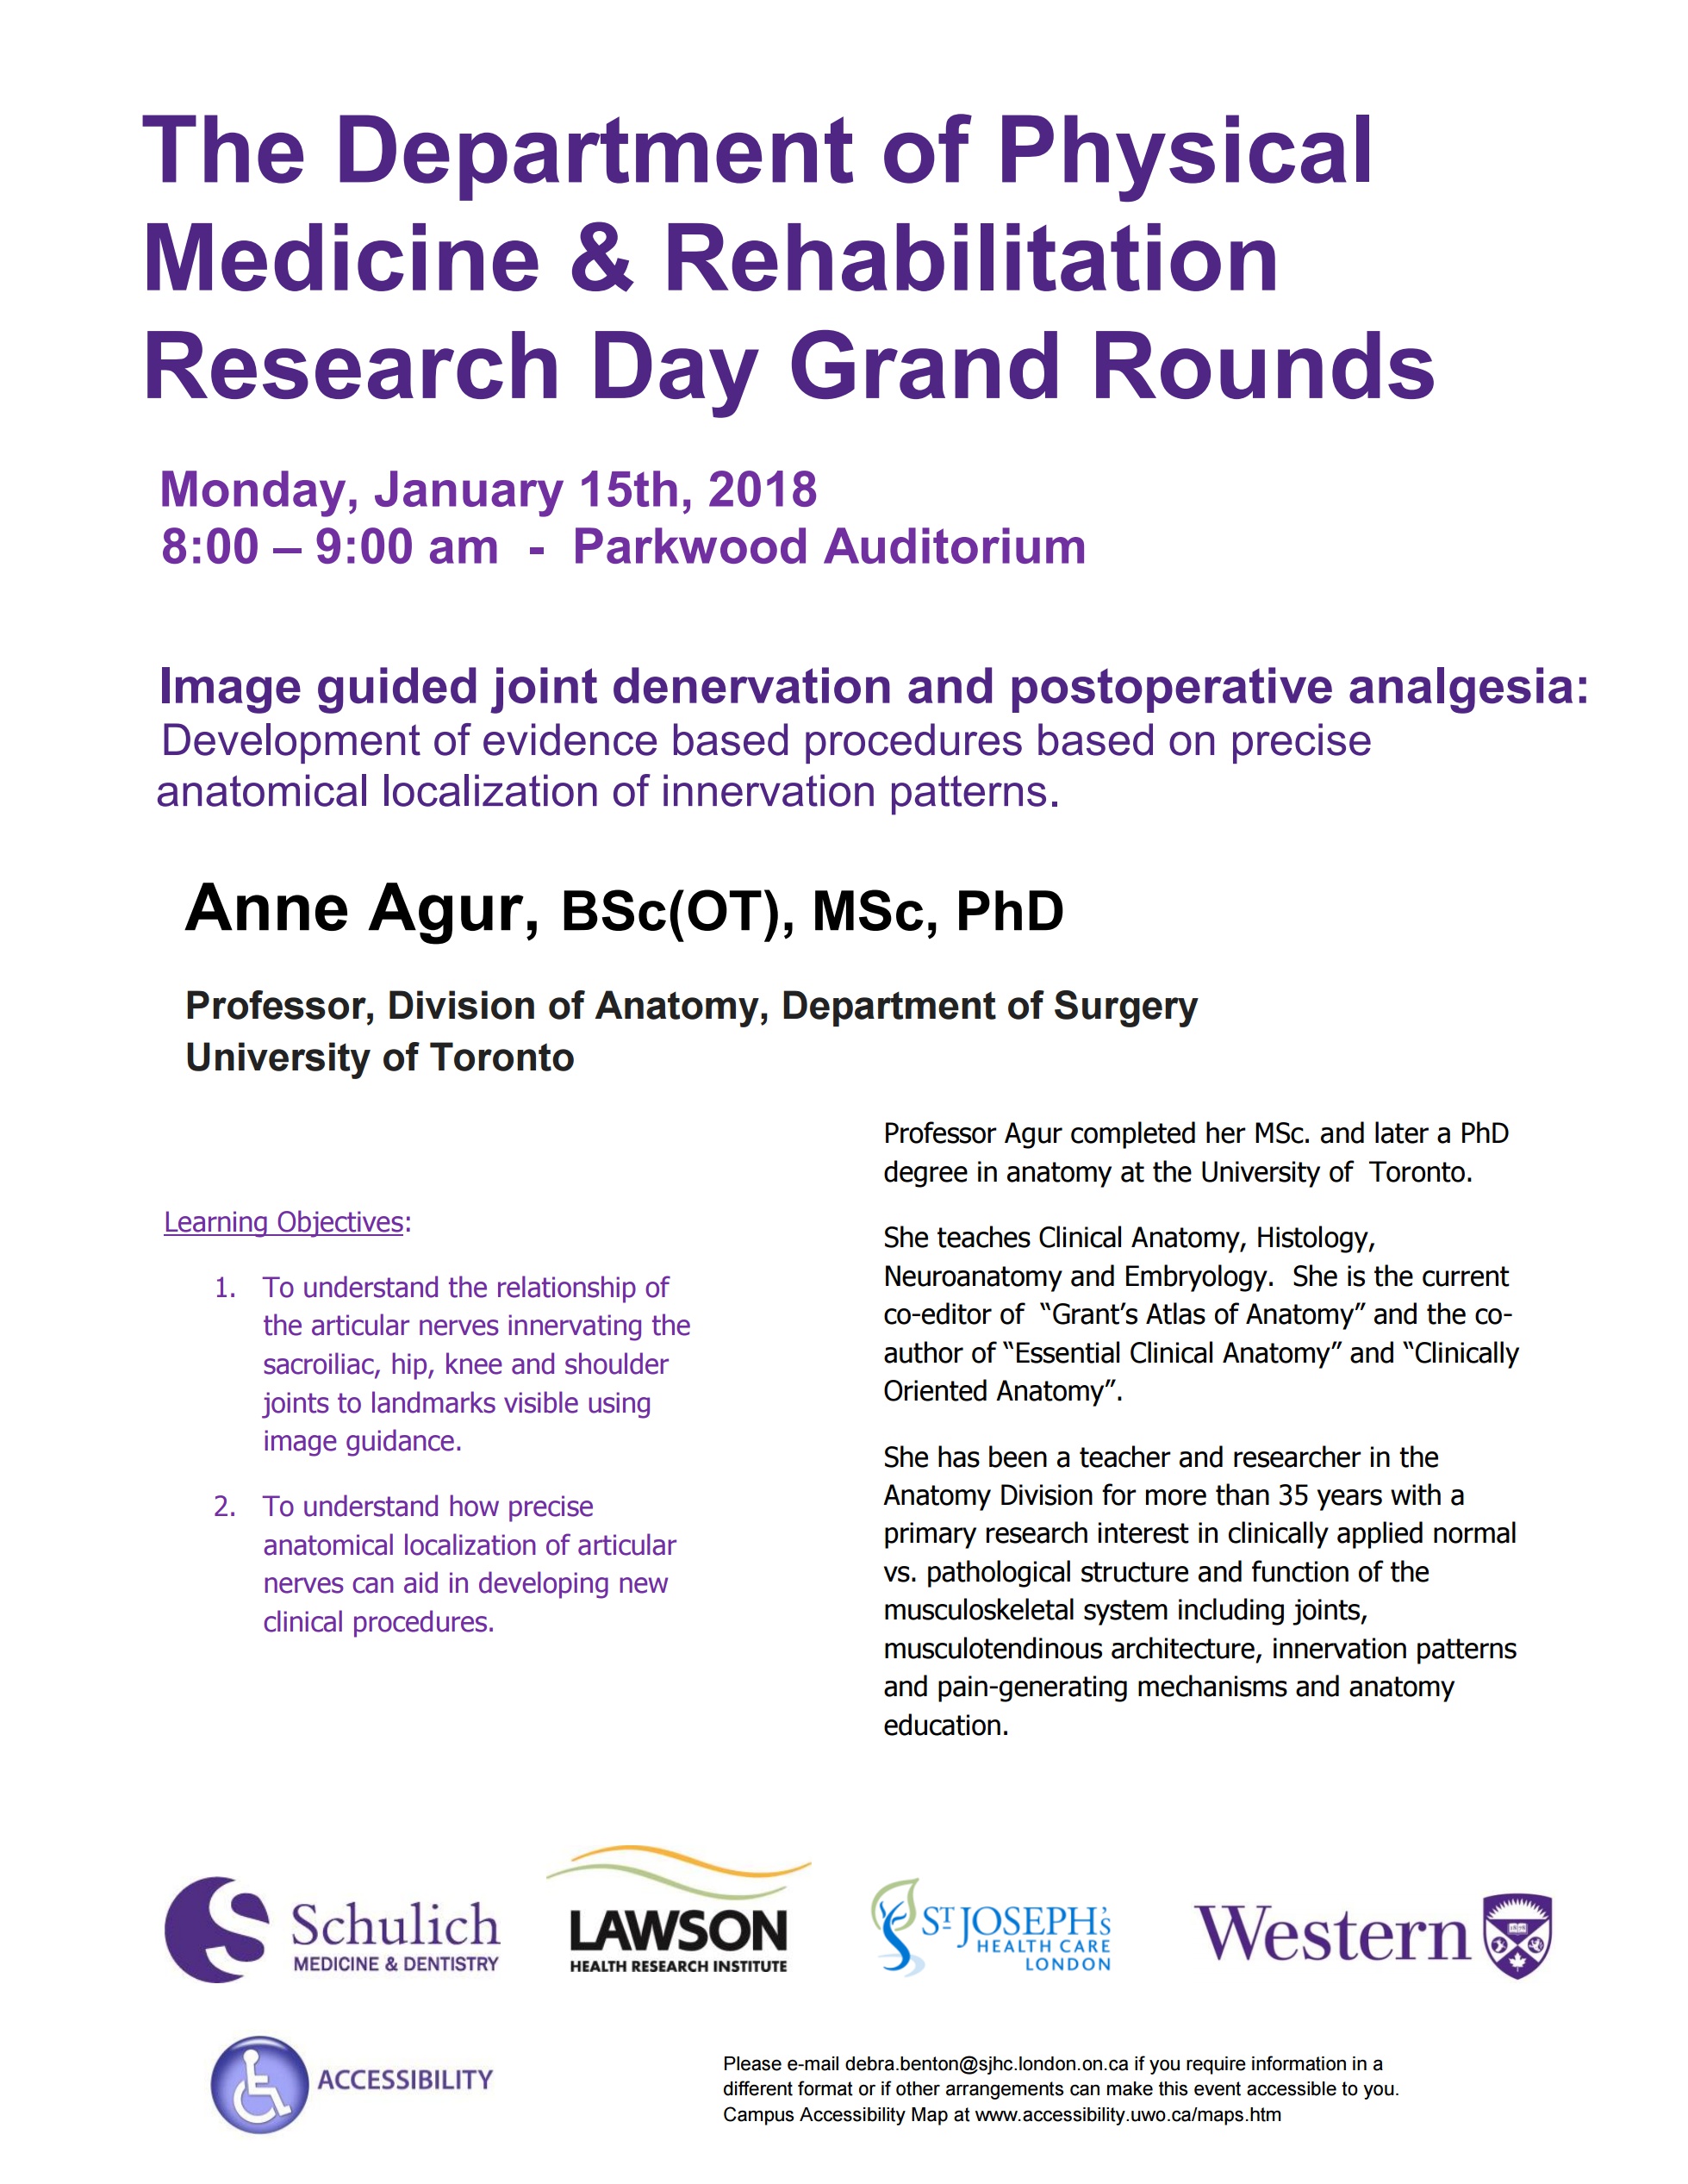 ResearchDayPoster